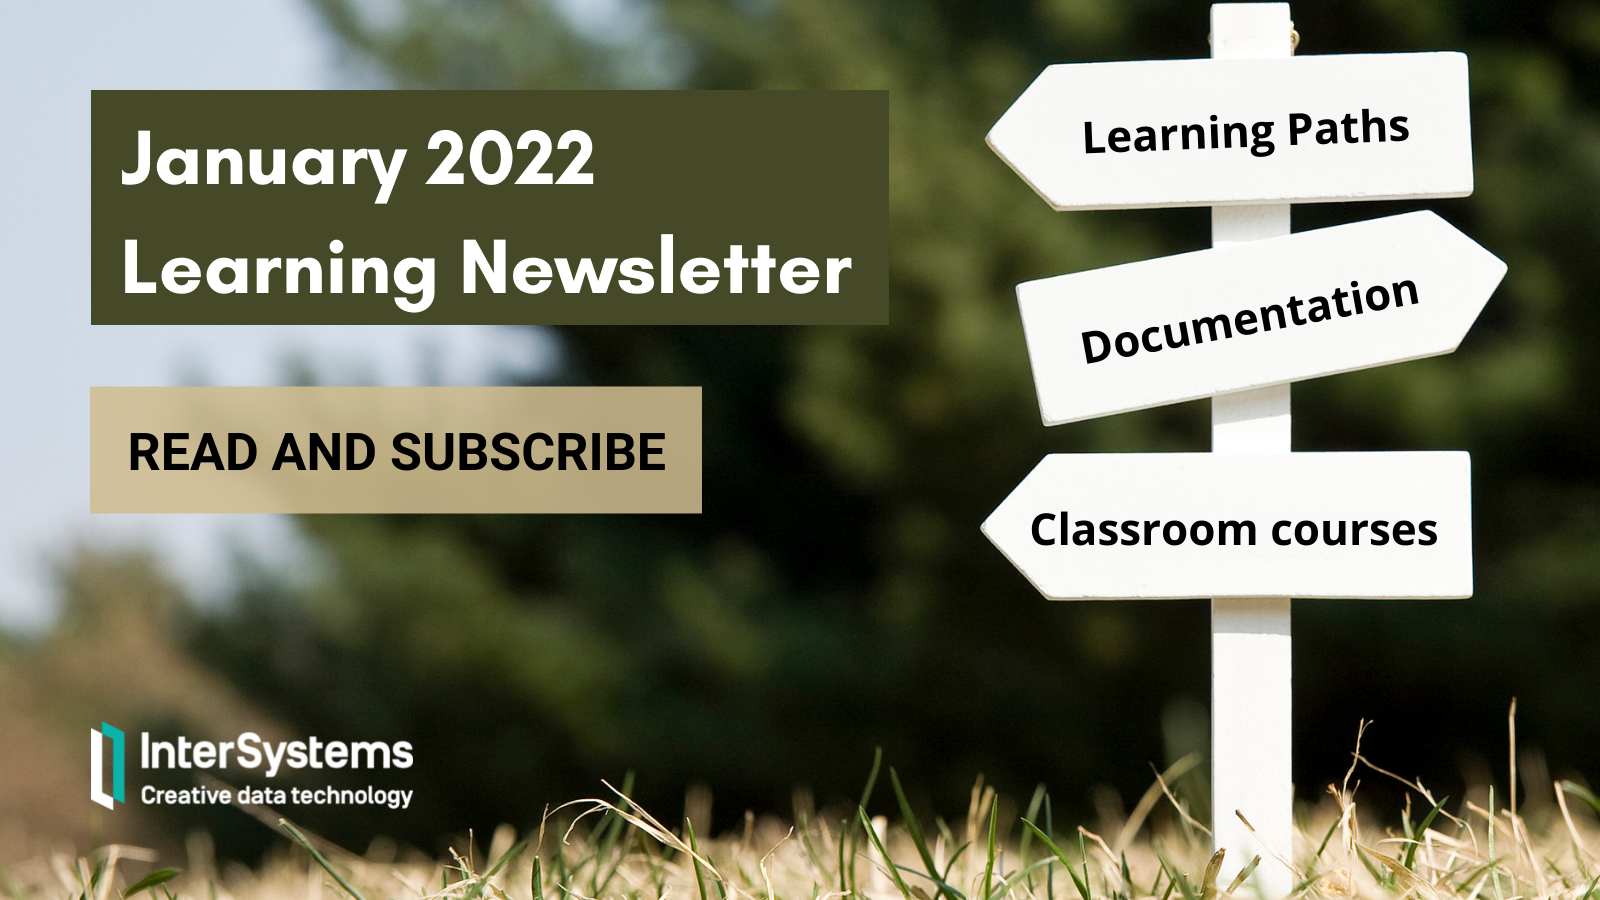 January 2022 Newsletter: Read and Subscribe.